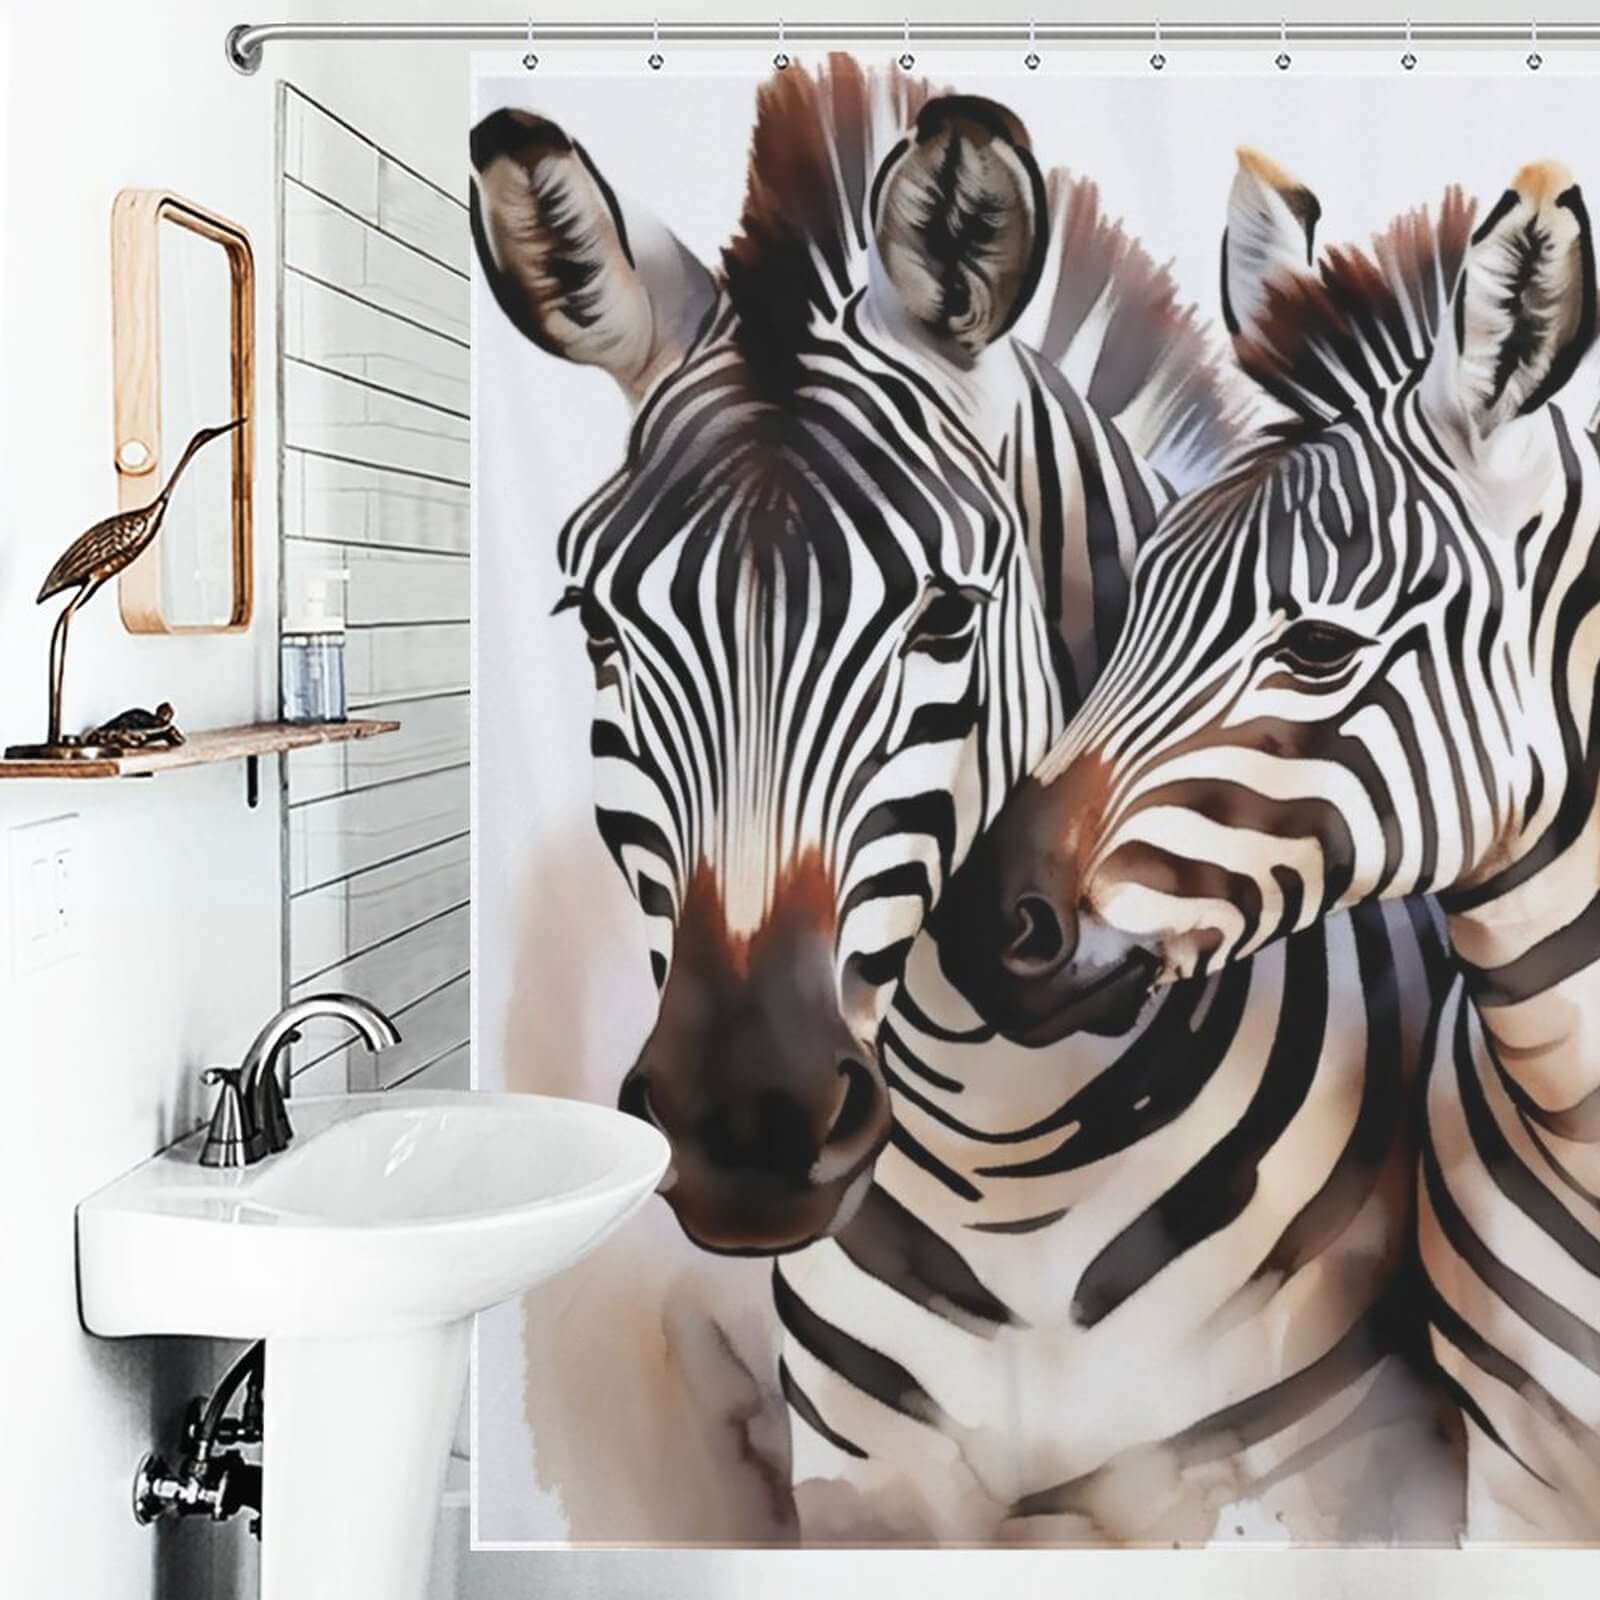 This Watercolor Zebra Shower Curtain by Cotton Cat features a hand-drawn watercolor design of two zebras. Made from 100% polyester material, it is both stylish and durable.